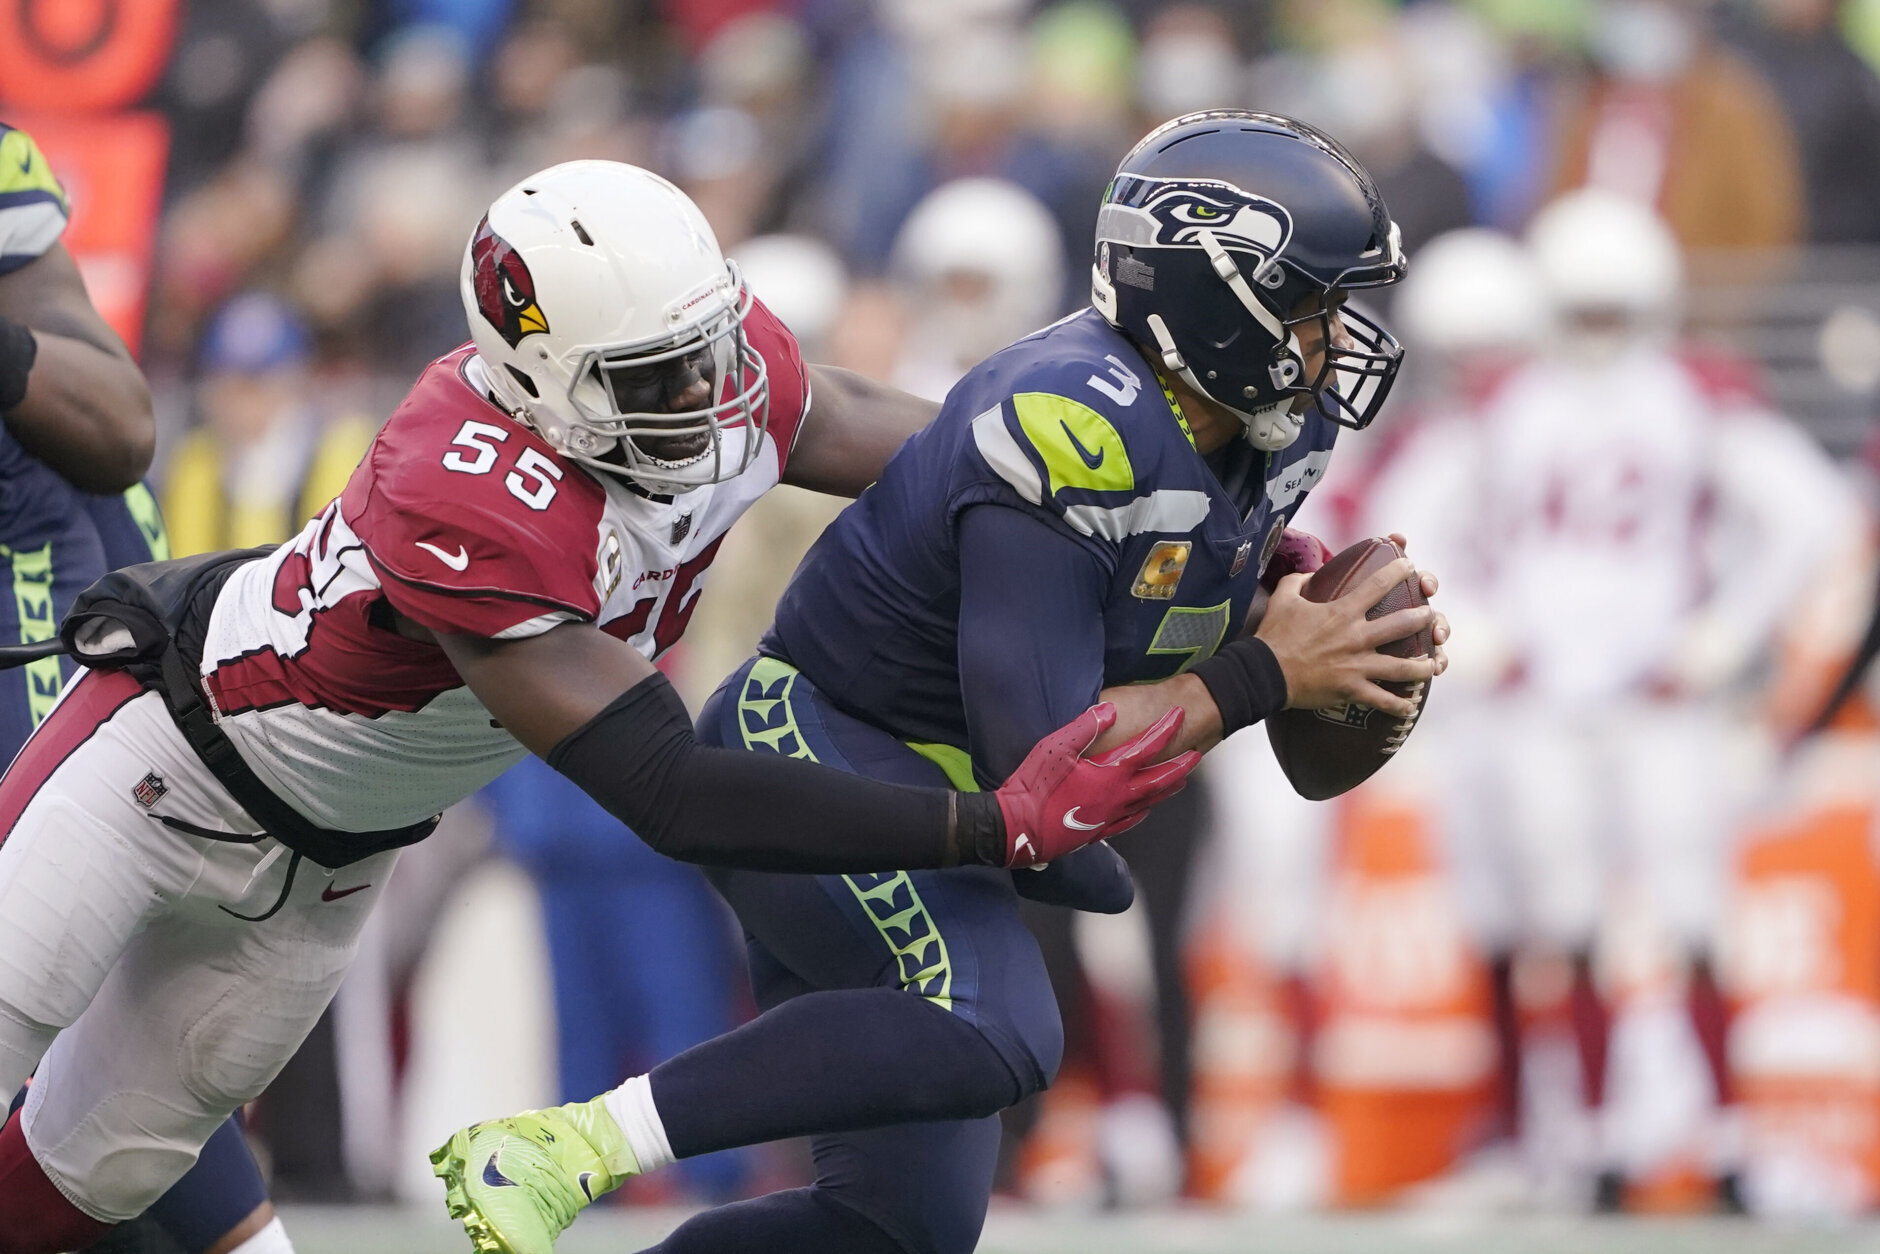 <p><em><strong>Cardinals 23</strong></em><br />
<em><strong>Seahawks 13</strong></em></p>
<p><a href="https://profootballtalk.nbcsports.com/2021/11/19/russell-wilson-on-3-6-seahawks-the-urgency-is-high/" target="_blank" rel="noopener">Despite the high urgency</a>, Russell Wilson was outdueled by Colt McCoy(!!!) and kept out of the end zone for the second consecutive game. With 3-7 Seattle off to its worst 10-game start of the Pete Carroll era, a Monday night loss in Washington &#8212; where the Burgundy and Gold are notoriously inept &#8212; could spell the beginning of the end of that coach-QB combo.</p>
<p>Meanwhile, Arizona might just be for real after all. No Kyler Murray, no D-Hop and still beat a division rival on the road to improve to 6-0 on the road &#8212; all by double digits? I&#8217;m taking the Cards seriously from here on out.</p>
